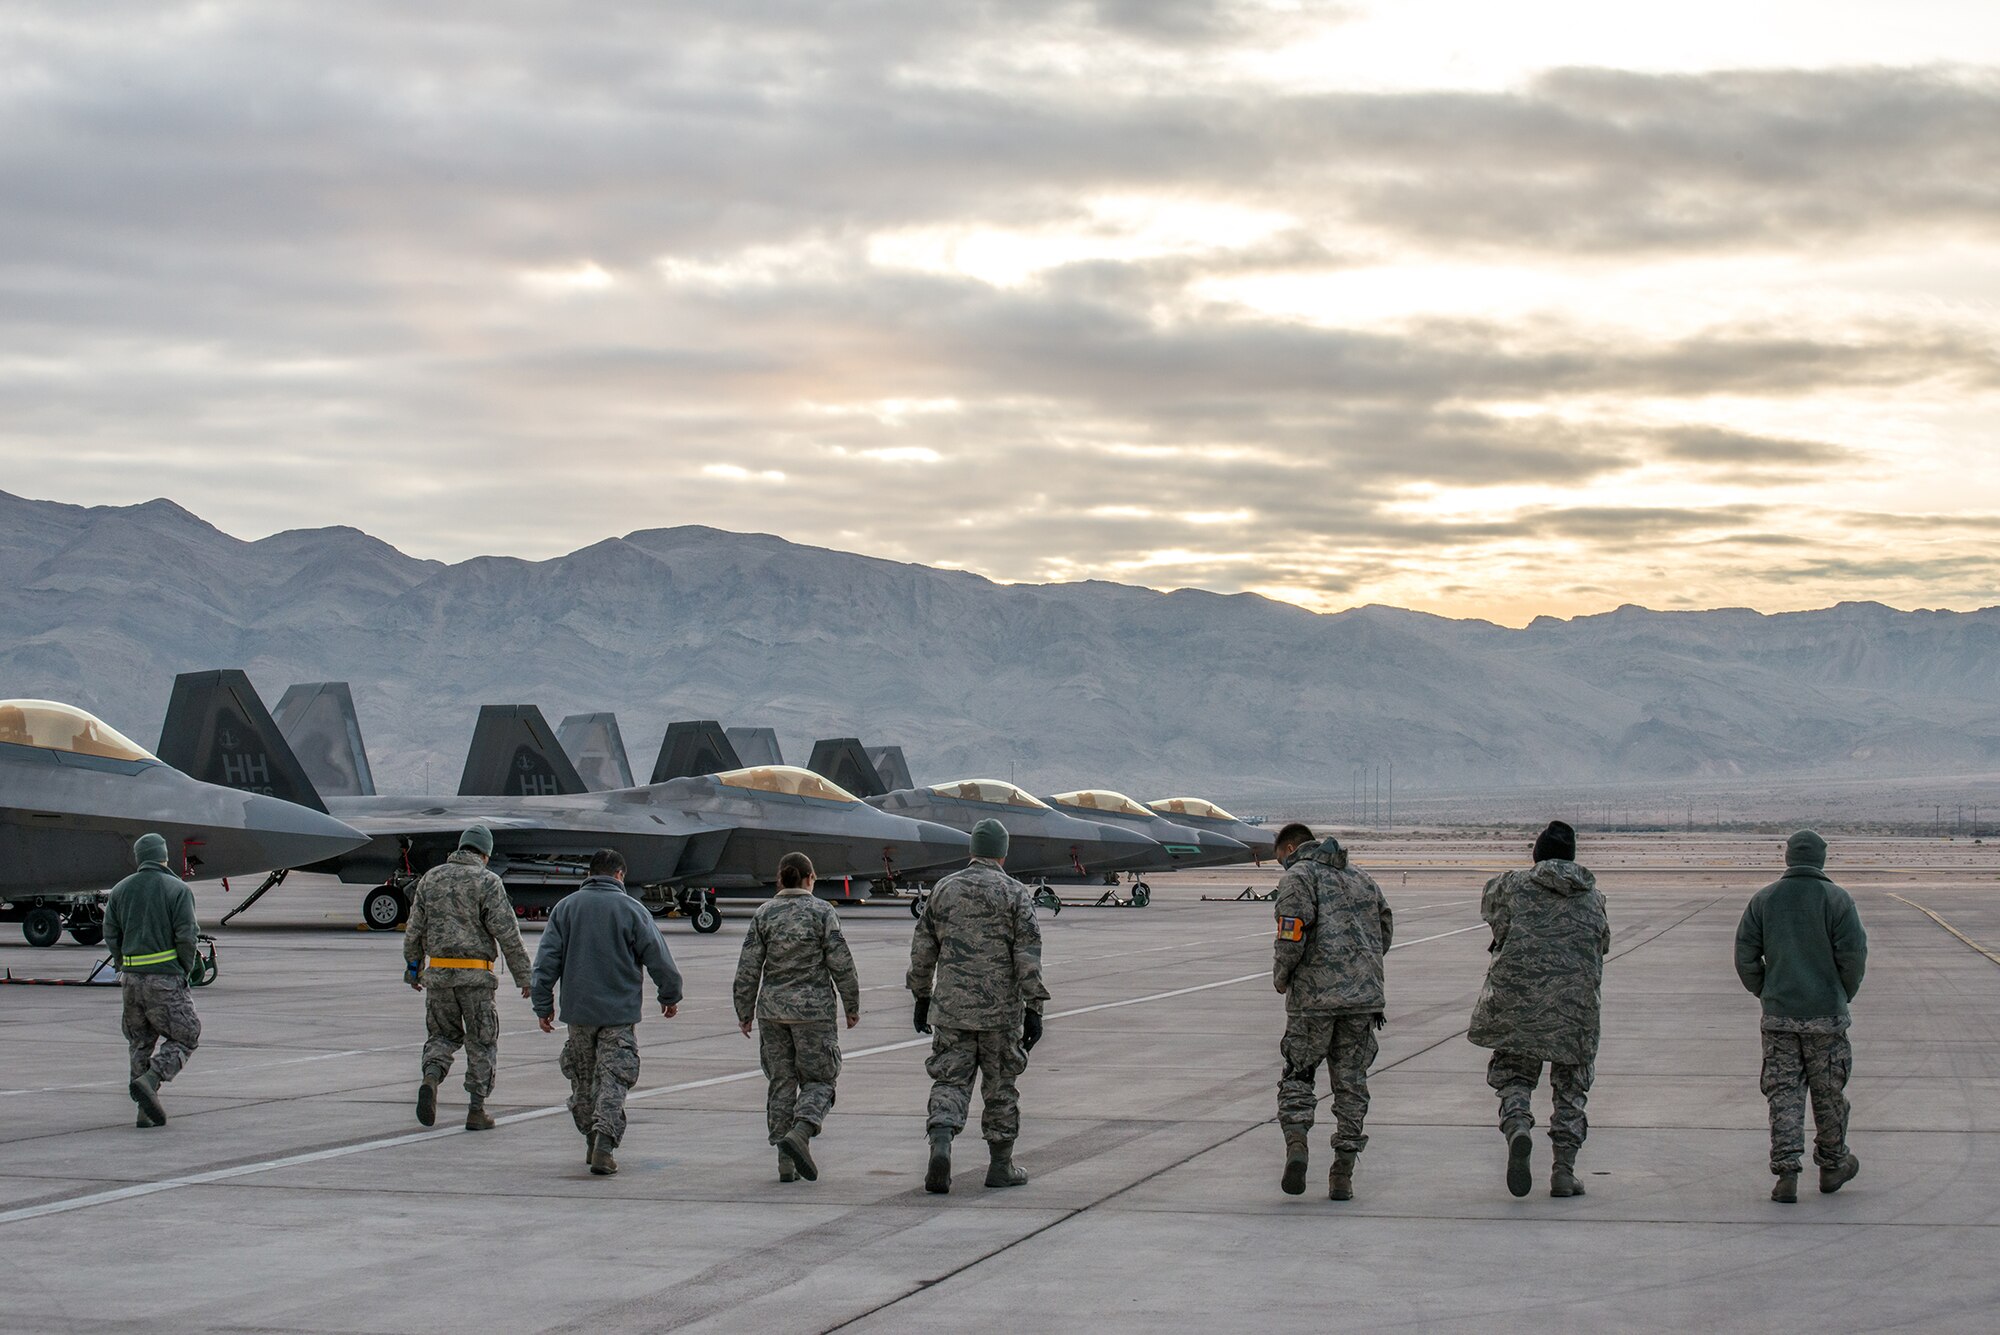 Maintainers deployed from the 15th Wing and 154th Wing, Air National Guard, conduct a foreign object debris walk on the flightline at Nellis Air Force Base, Nevada.  The crews and aircraft were deployed in support of Red Flag 13-2 from 21 Jan. through 1 Feb. Red Flag is an advanced aerial combat training exercise that spans two weeks and is held at Nellis or Eielson Air Force Base, Alaska. The exercises host air crews from various U.S. and allied military units and air frames. (Courtesy photo/Ervin Booker)